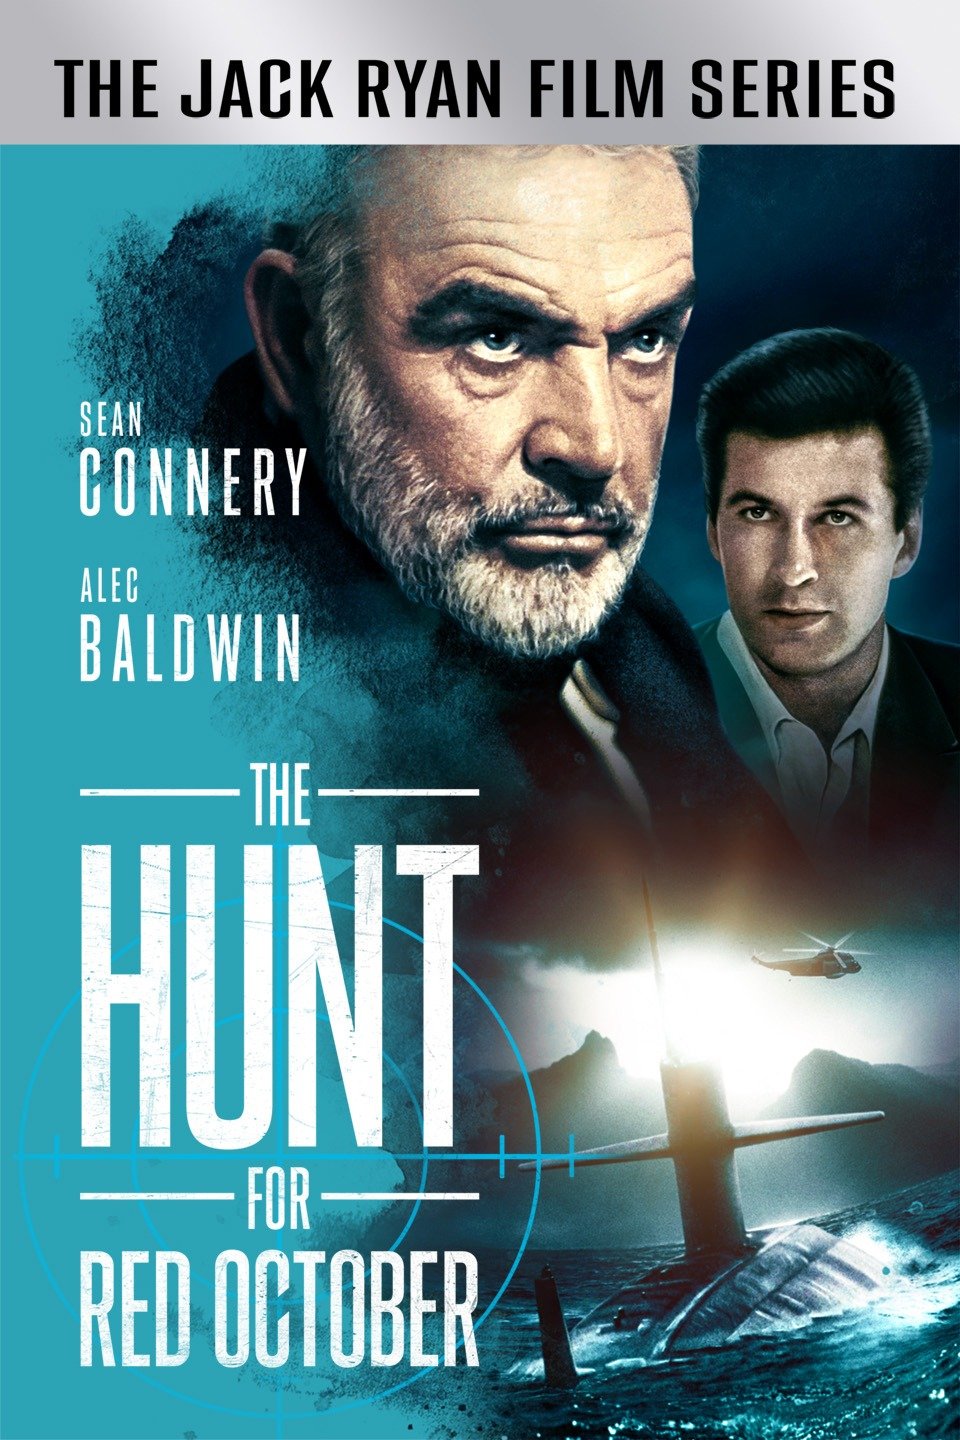 The Hunt Red October - Rotten Tomatoes